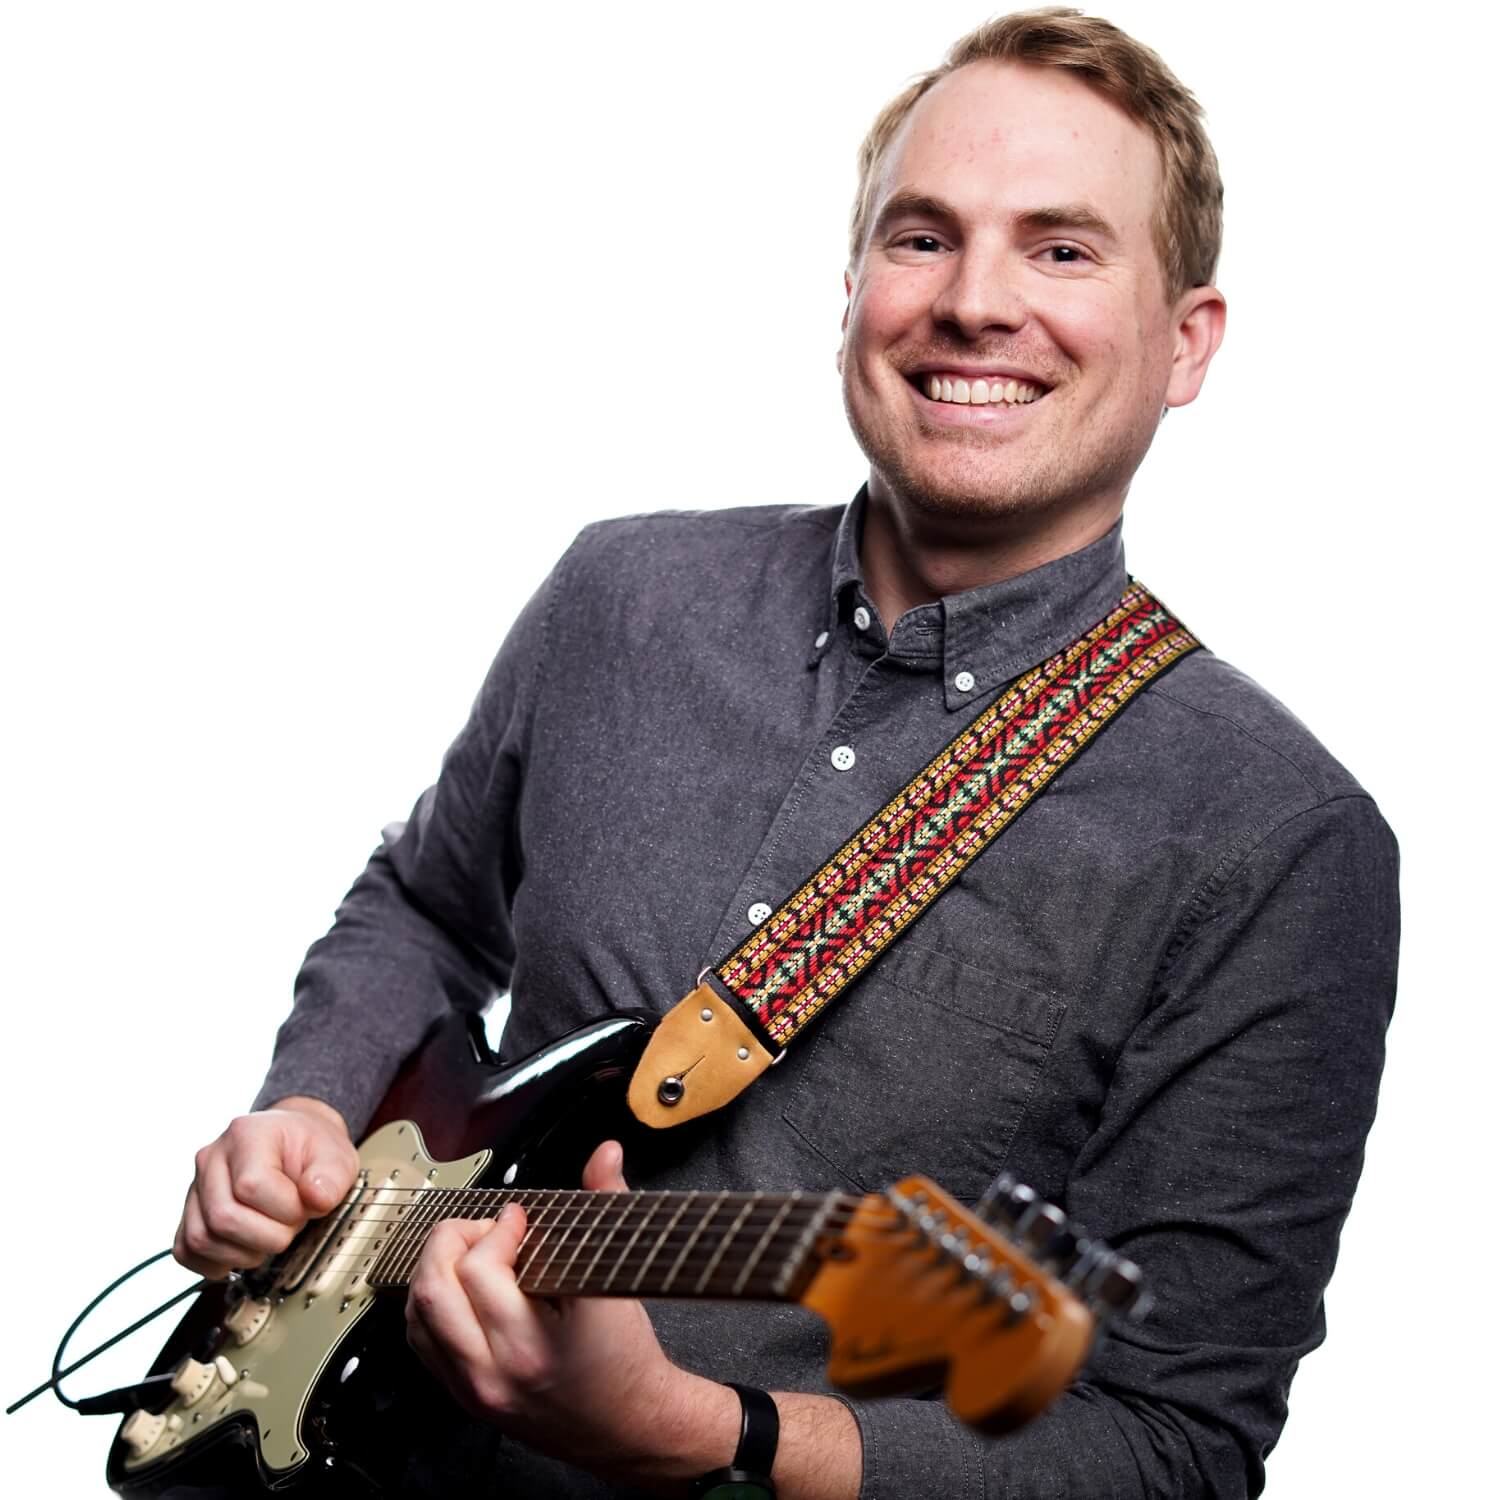 commercial headshot photography example of guitarist